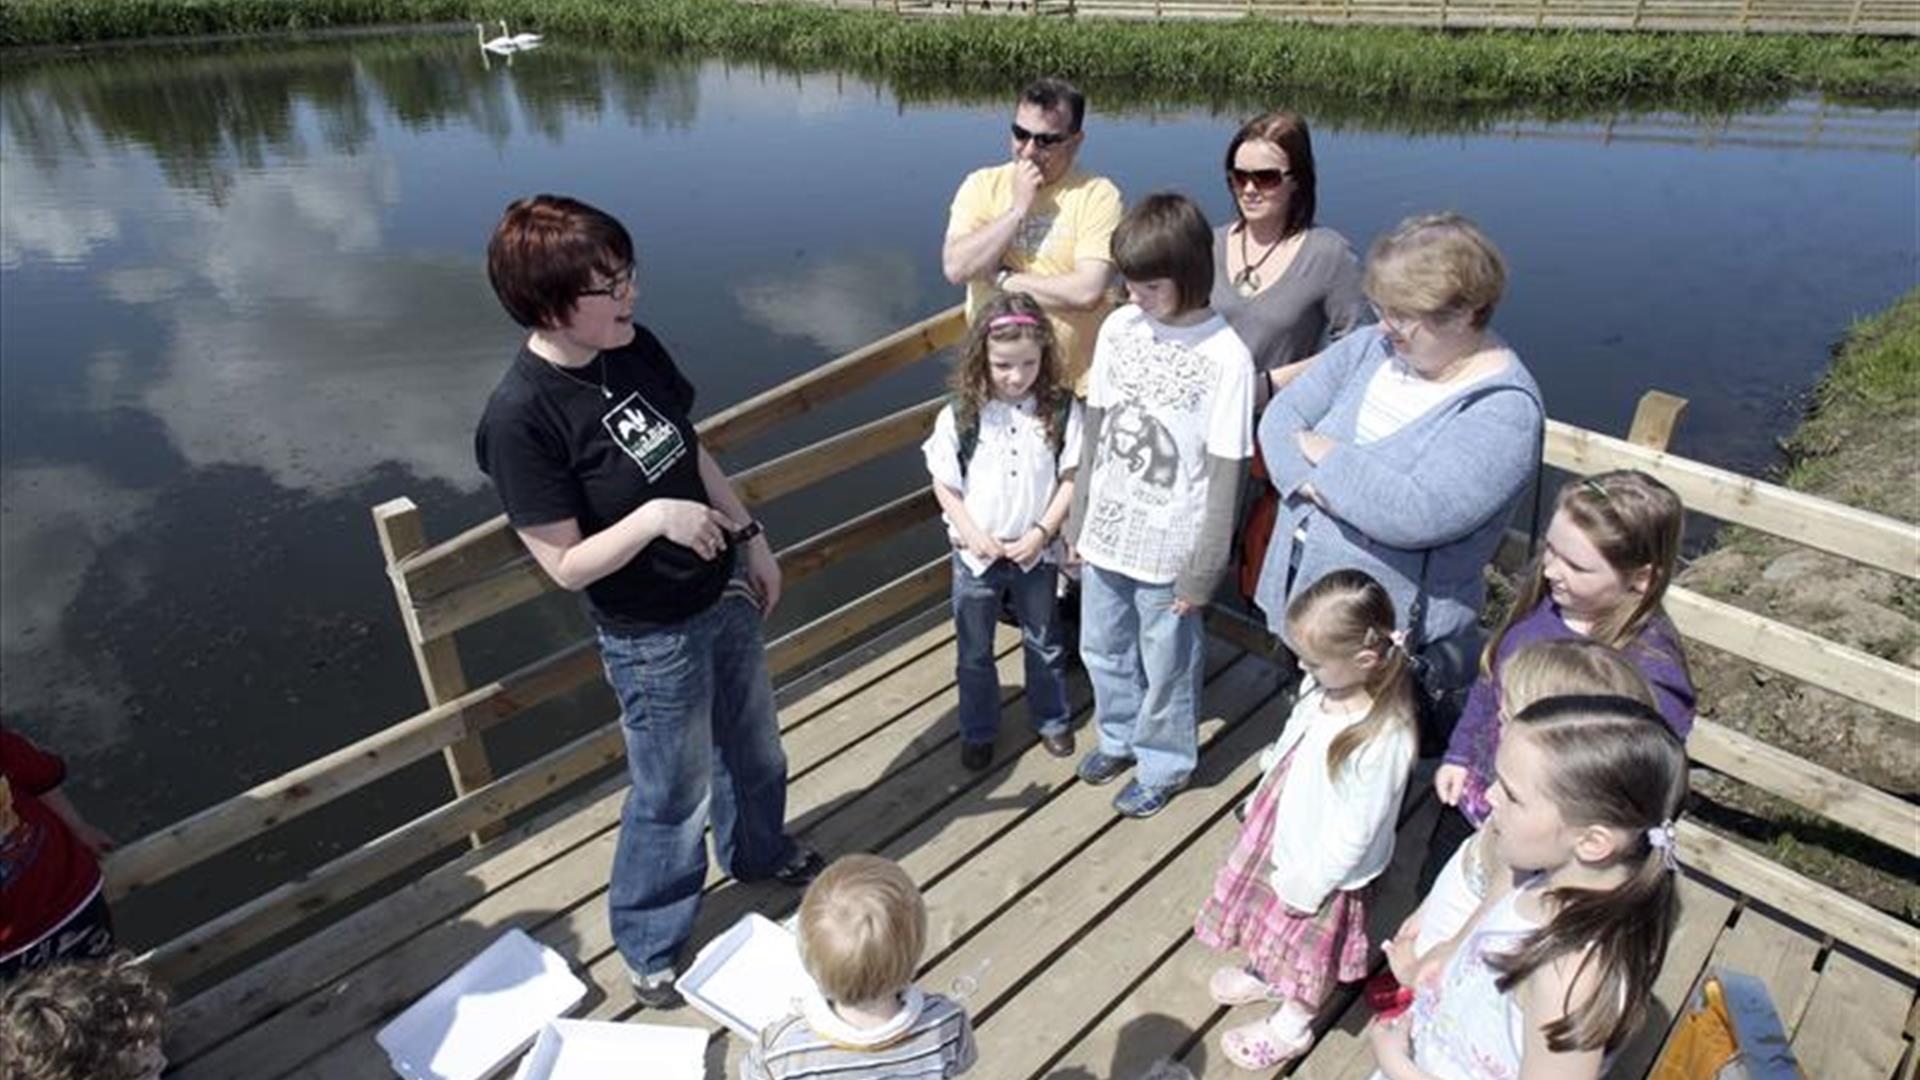 a photograph of a group of people standing next to a lake